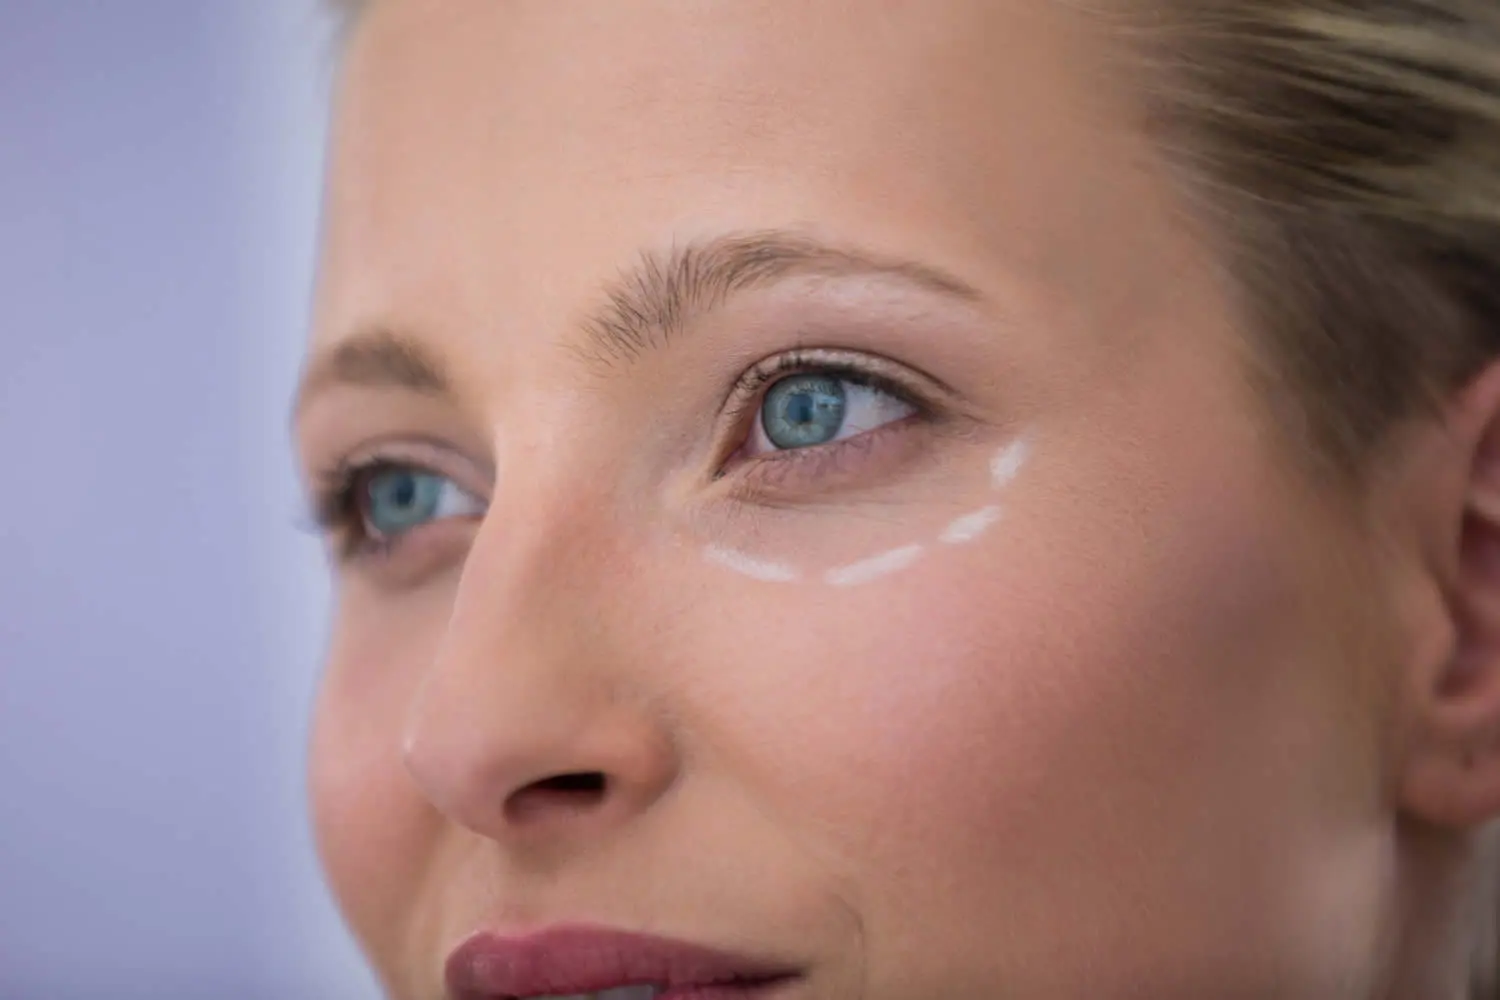 woman-with-marks-drawn-cosmetic-treatment-at-cosmetic-dermatologist